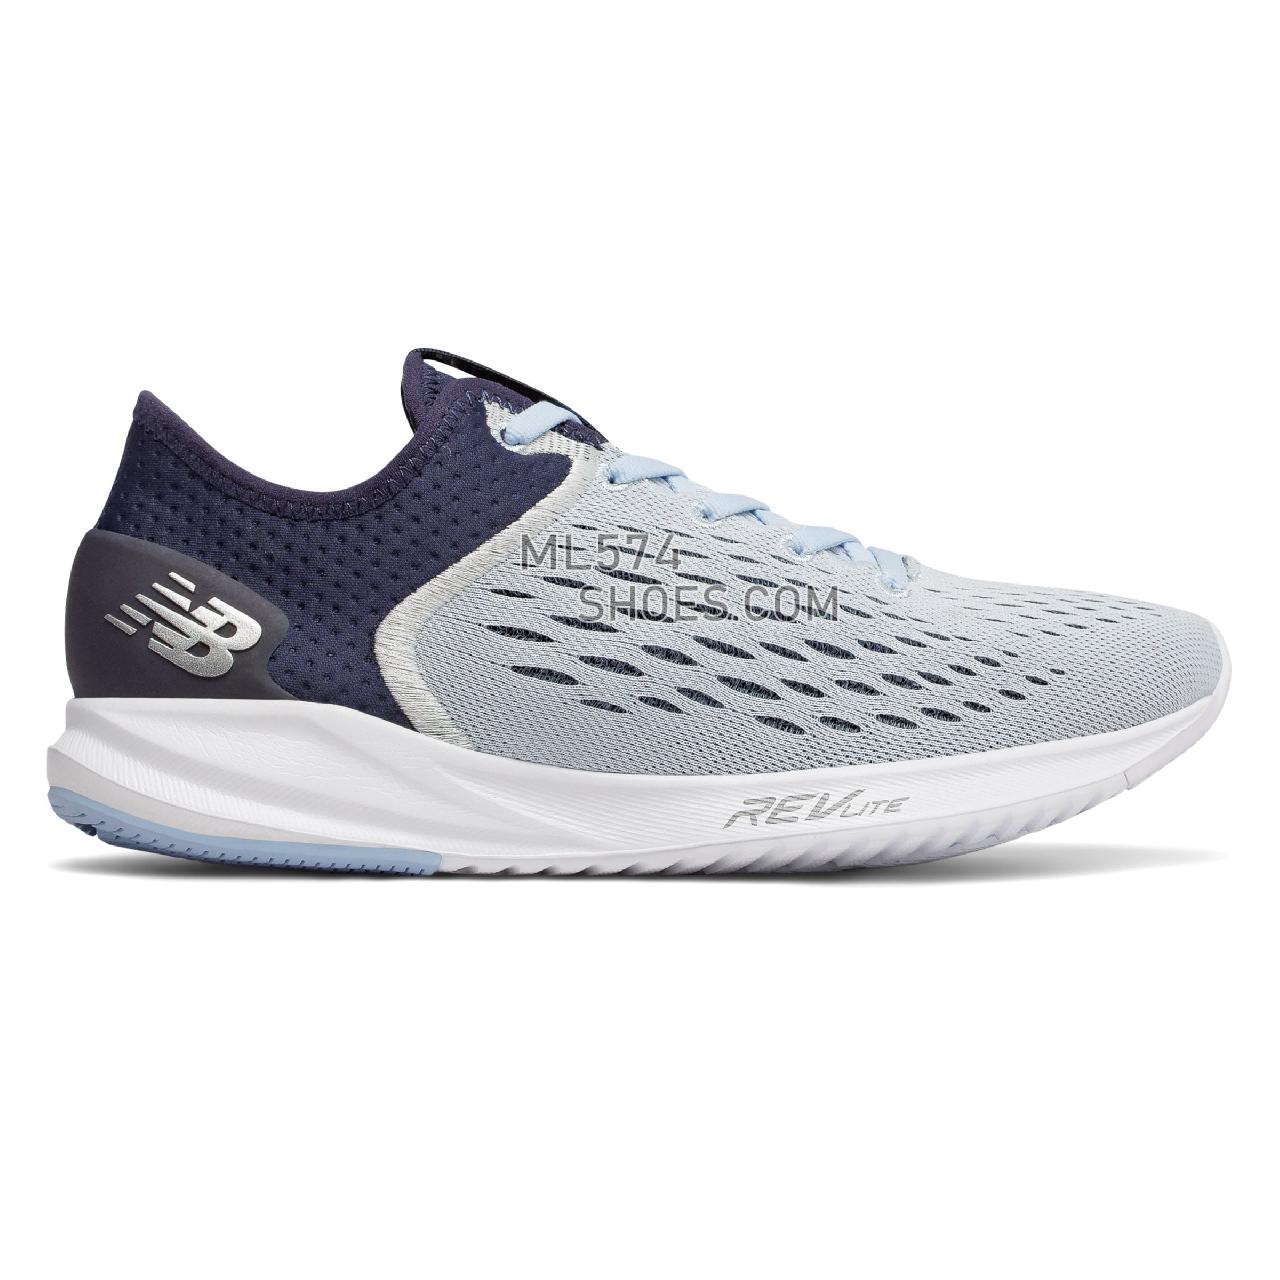 New Balance FuelCore 5000 - Women's FuelCore 5000 Running - Air with Pigment and Summer Sky - WFL5KAB